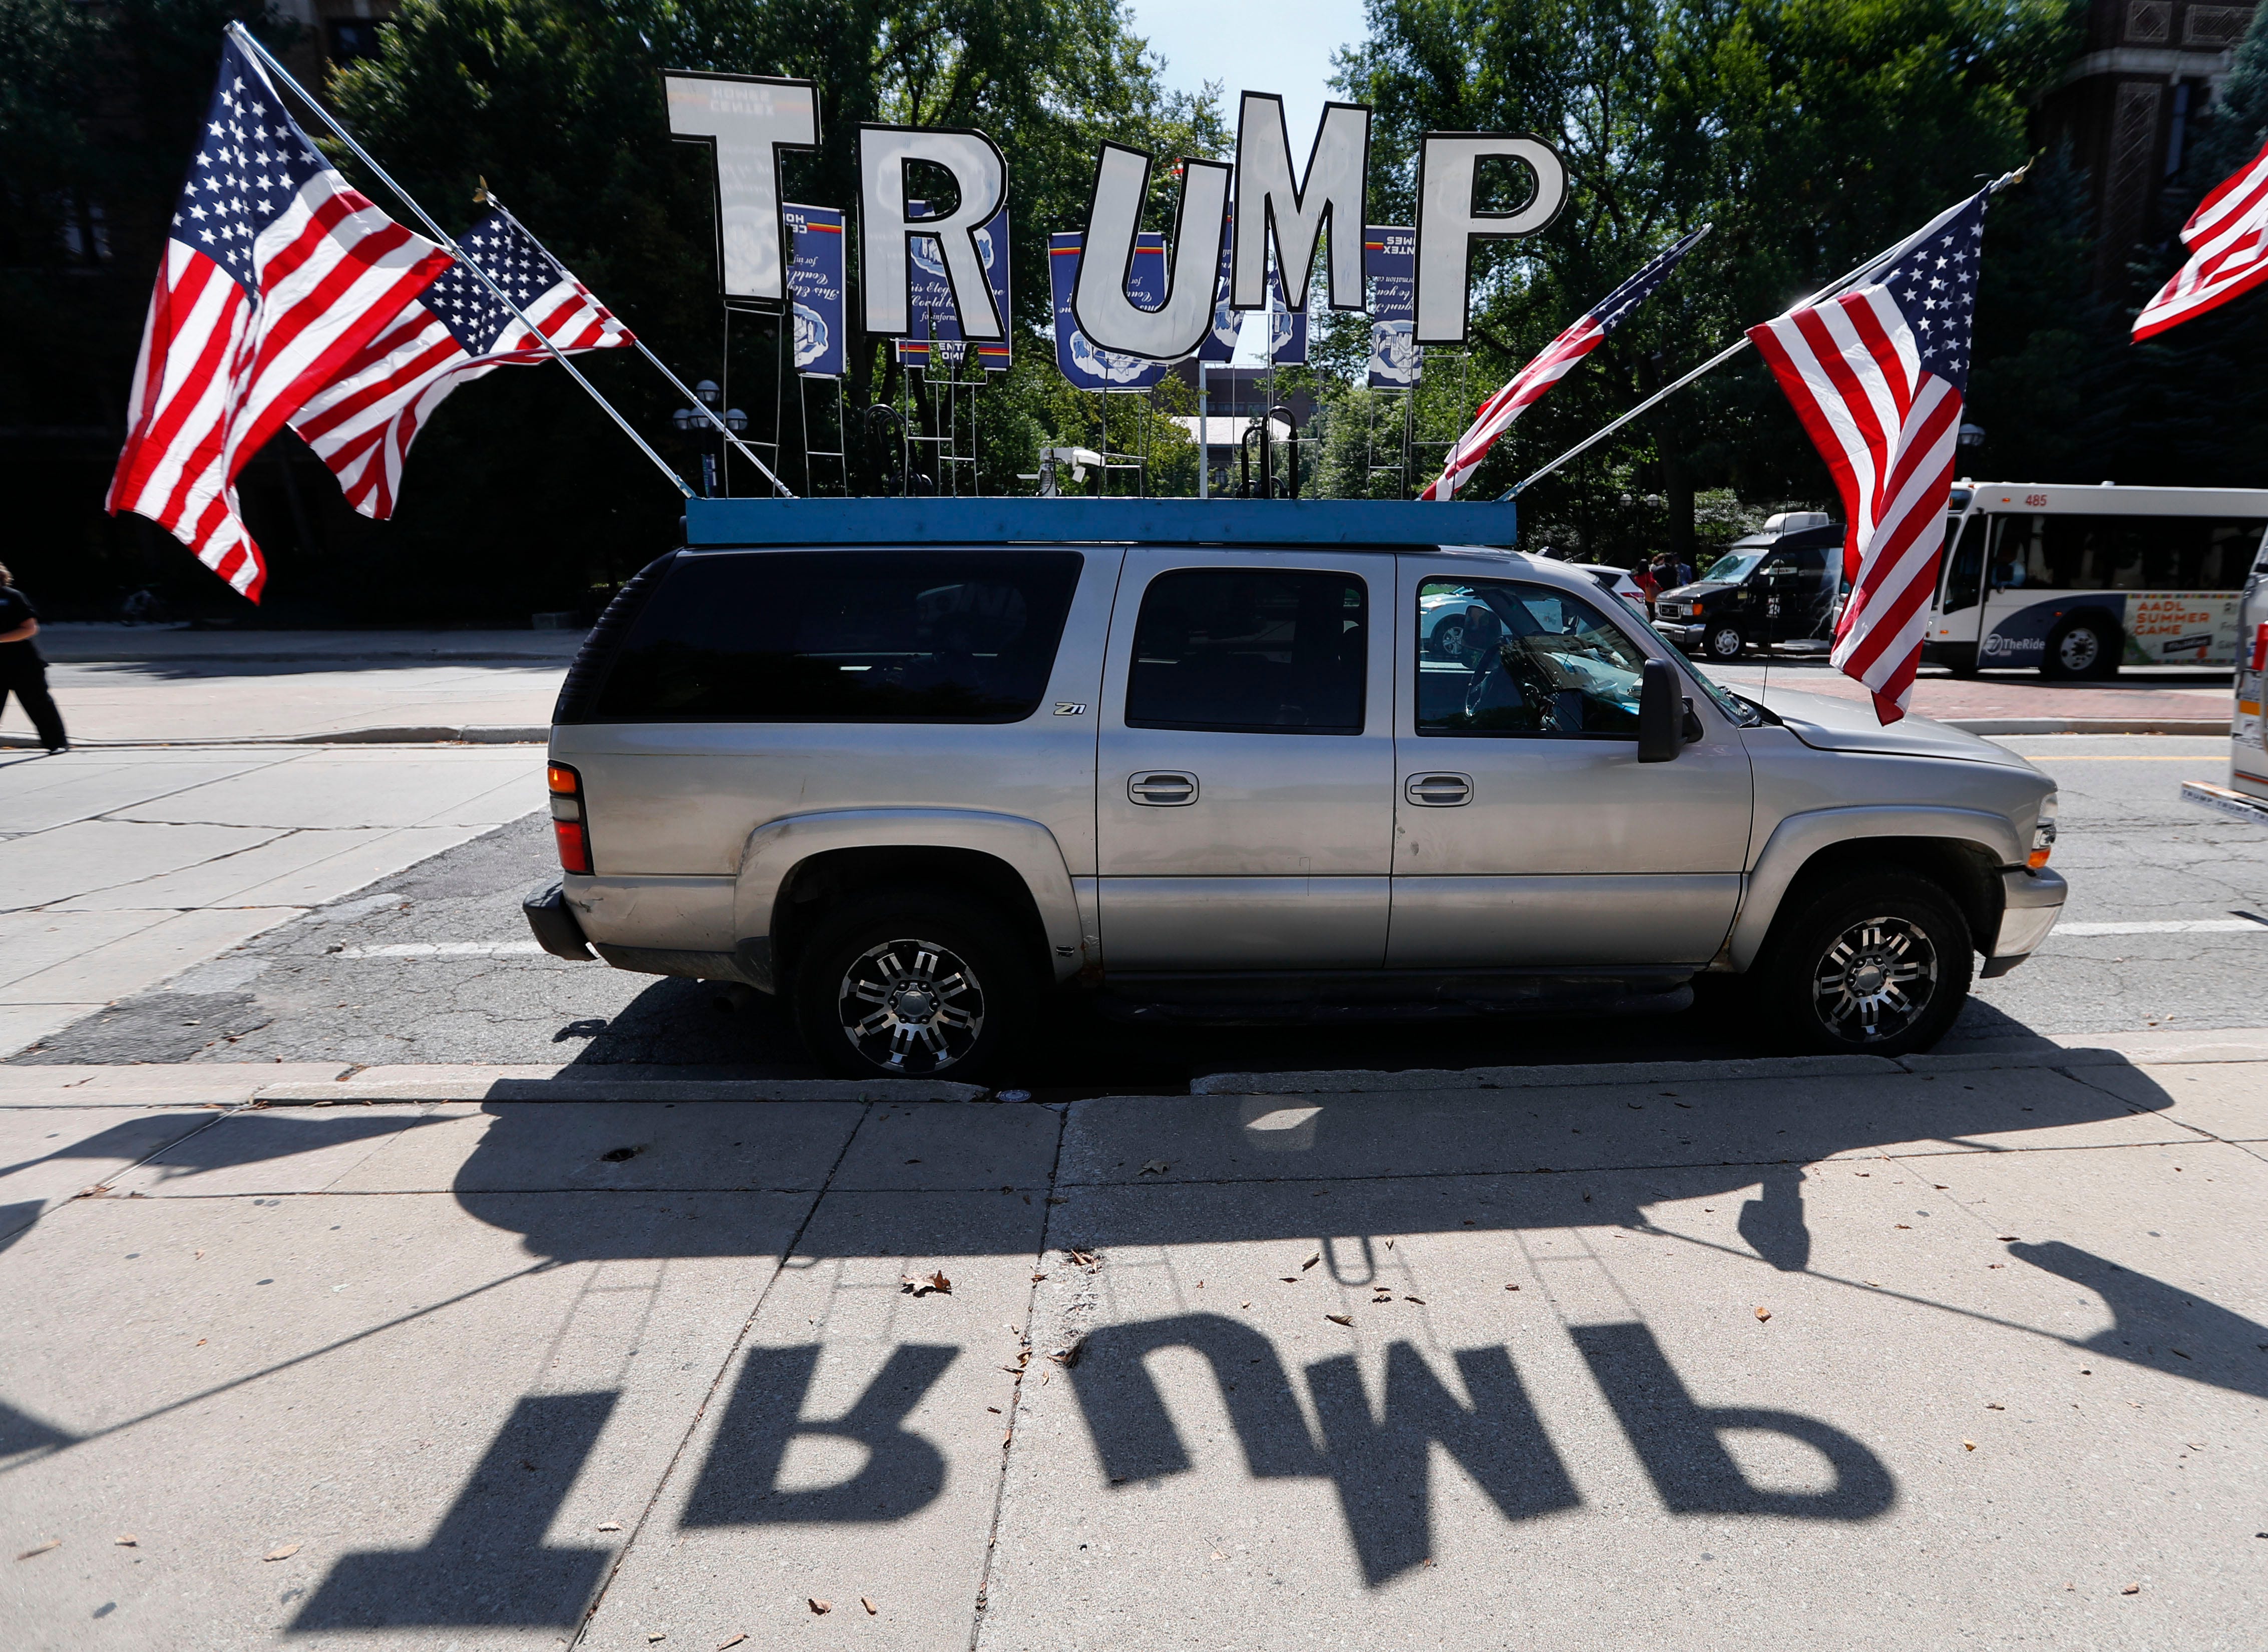 A vehicle is shown supporting Republican presidential candidate Donald Trump at the University of Michigan in Ann Arbor, Mich. on Sept. 13, 2016.